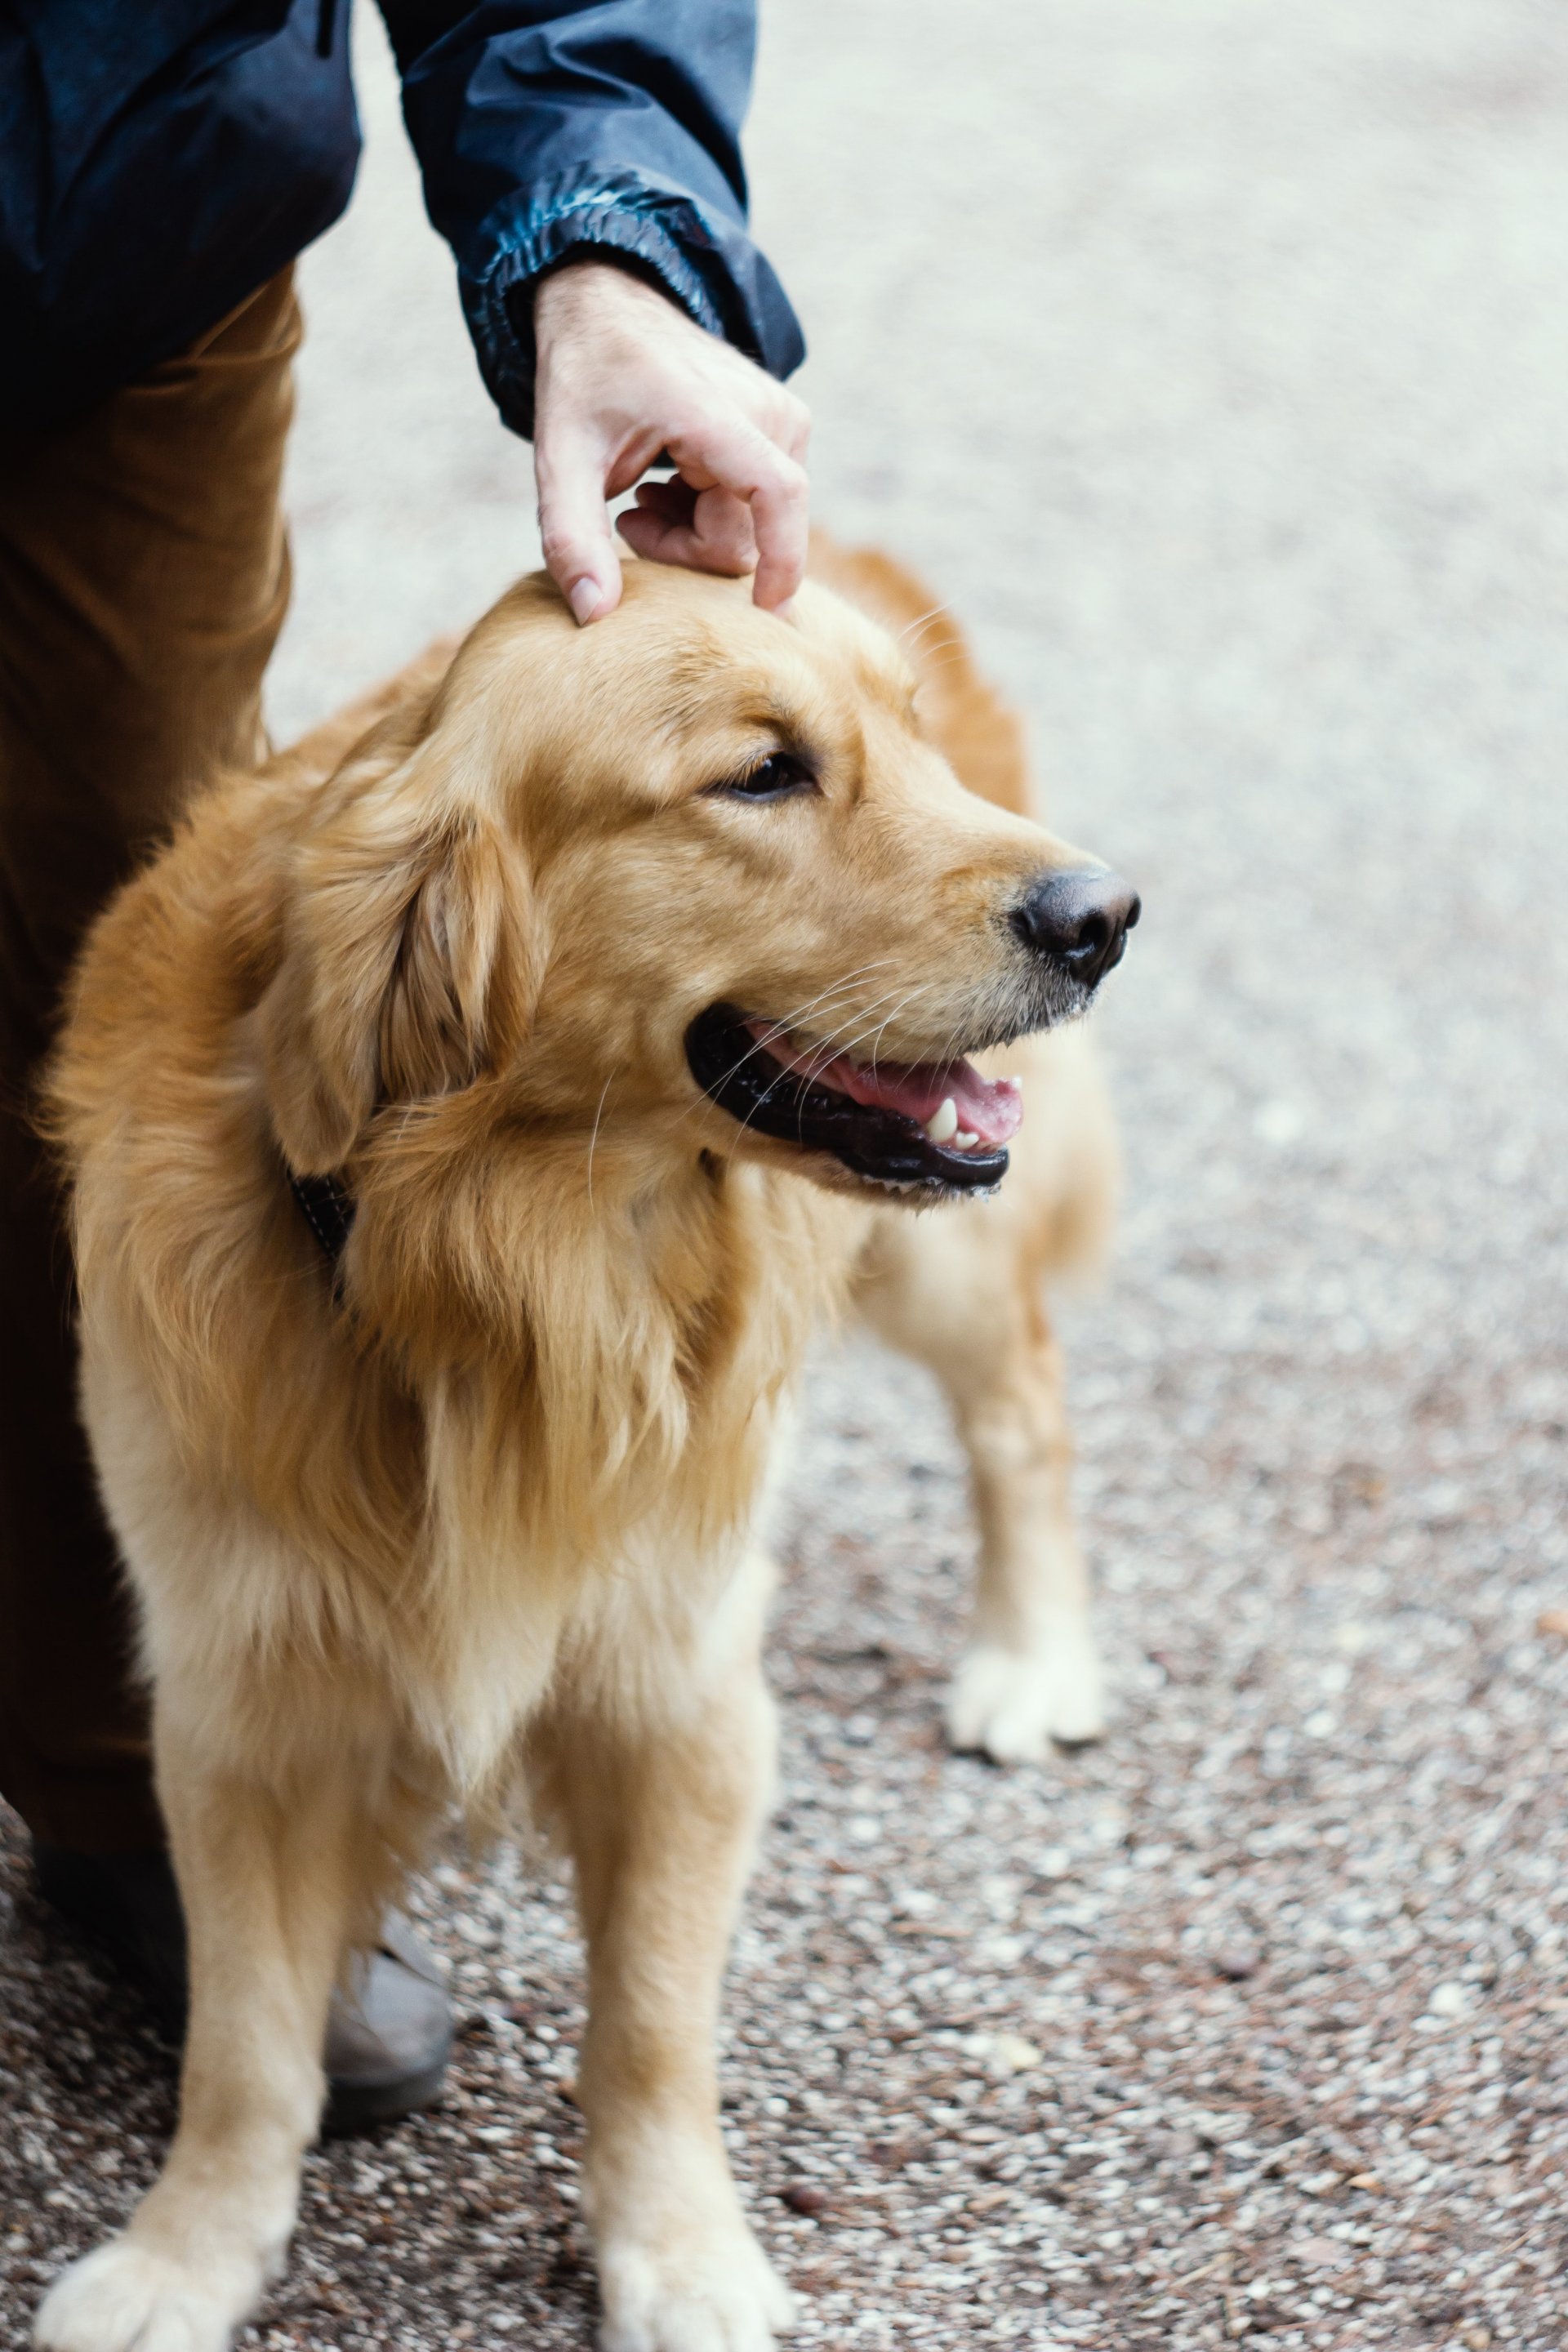 The Top 15 Friendliest Dog Breeds, According to Study